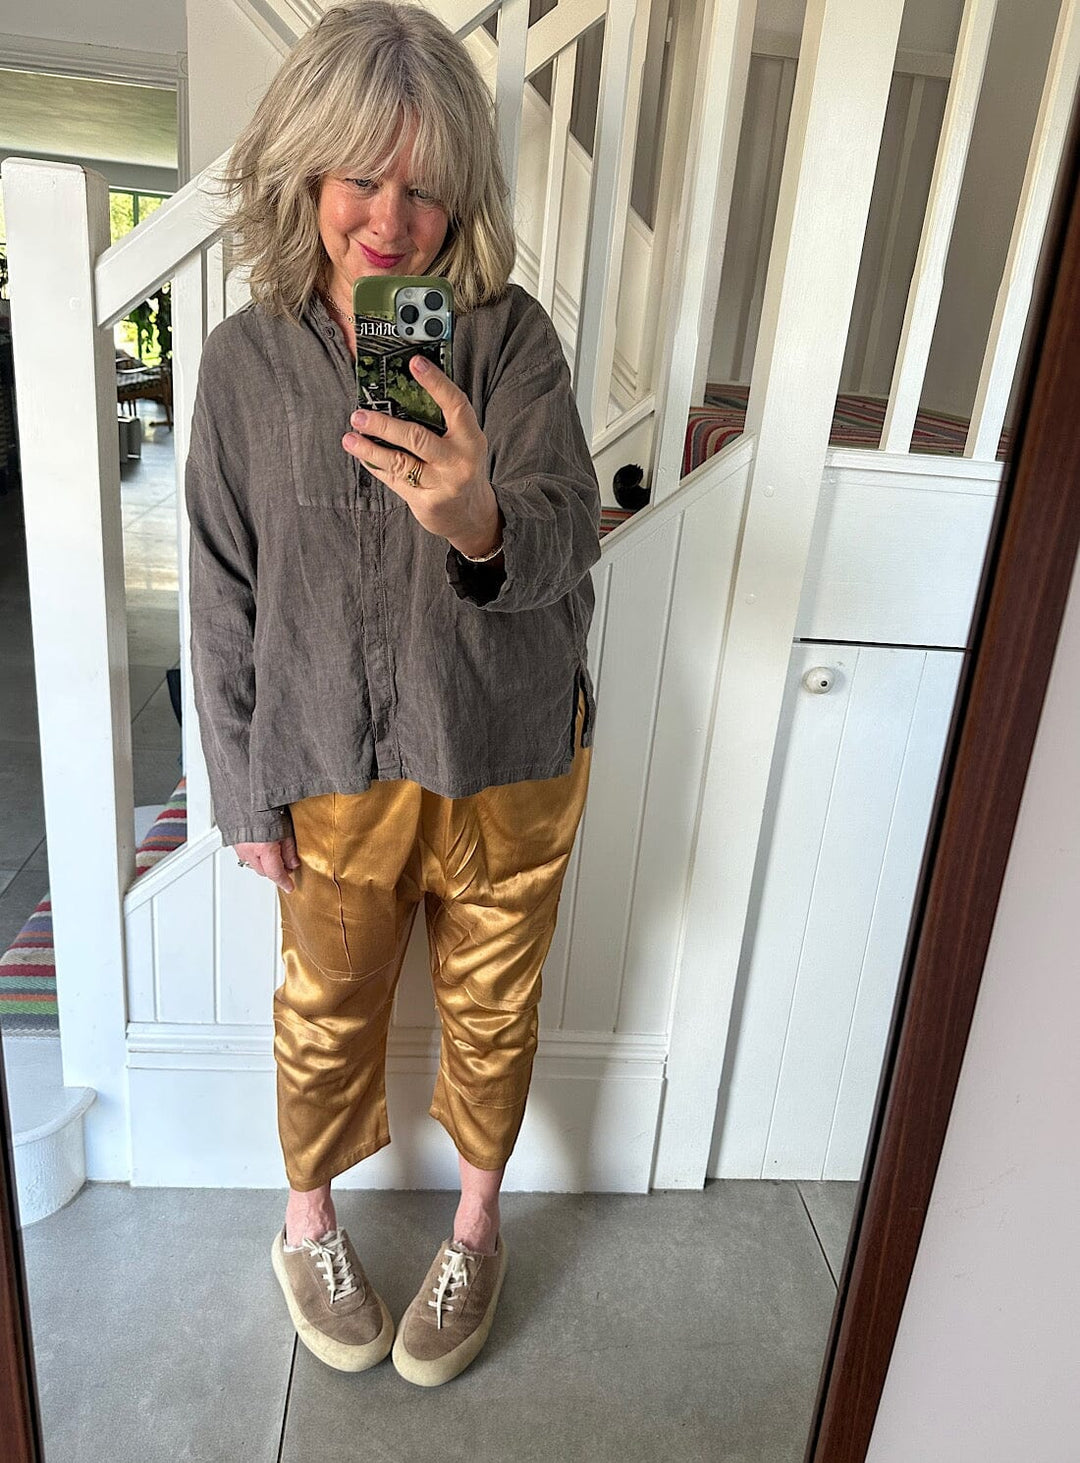 Jaipur Silk Hemp Cargo Pants in Coco Gold Trousers YBDFinds 